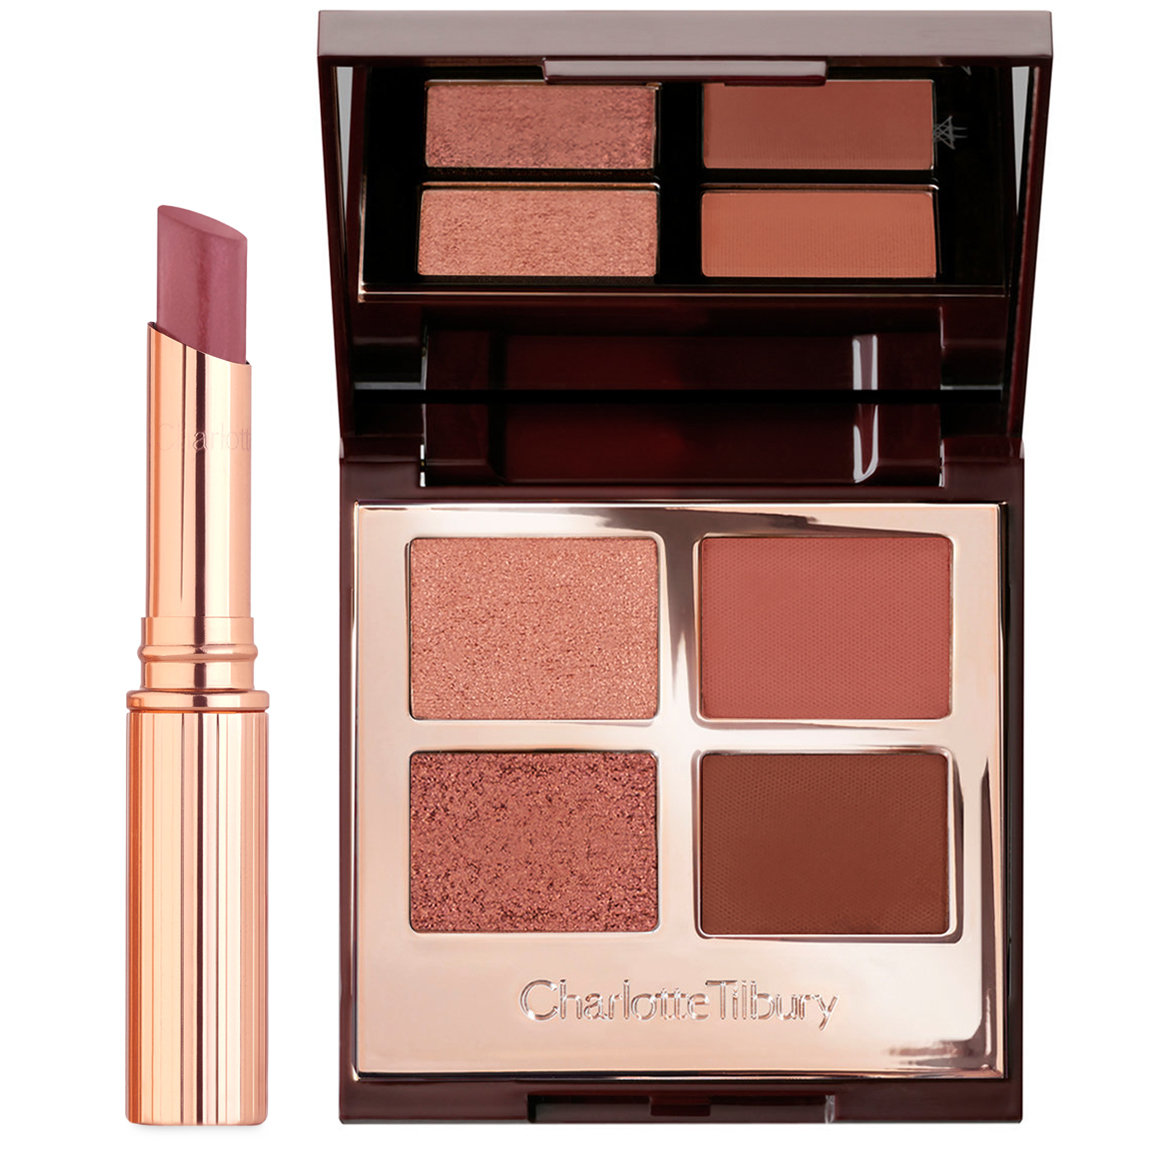 Free gift with qualifying Charlotte Tilbury purchase